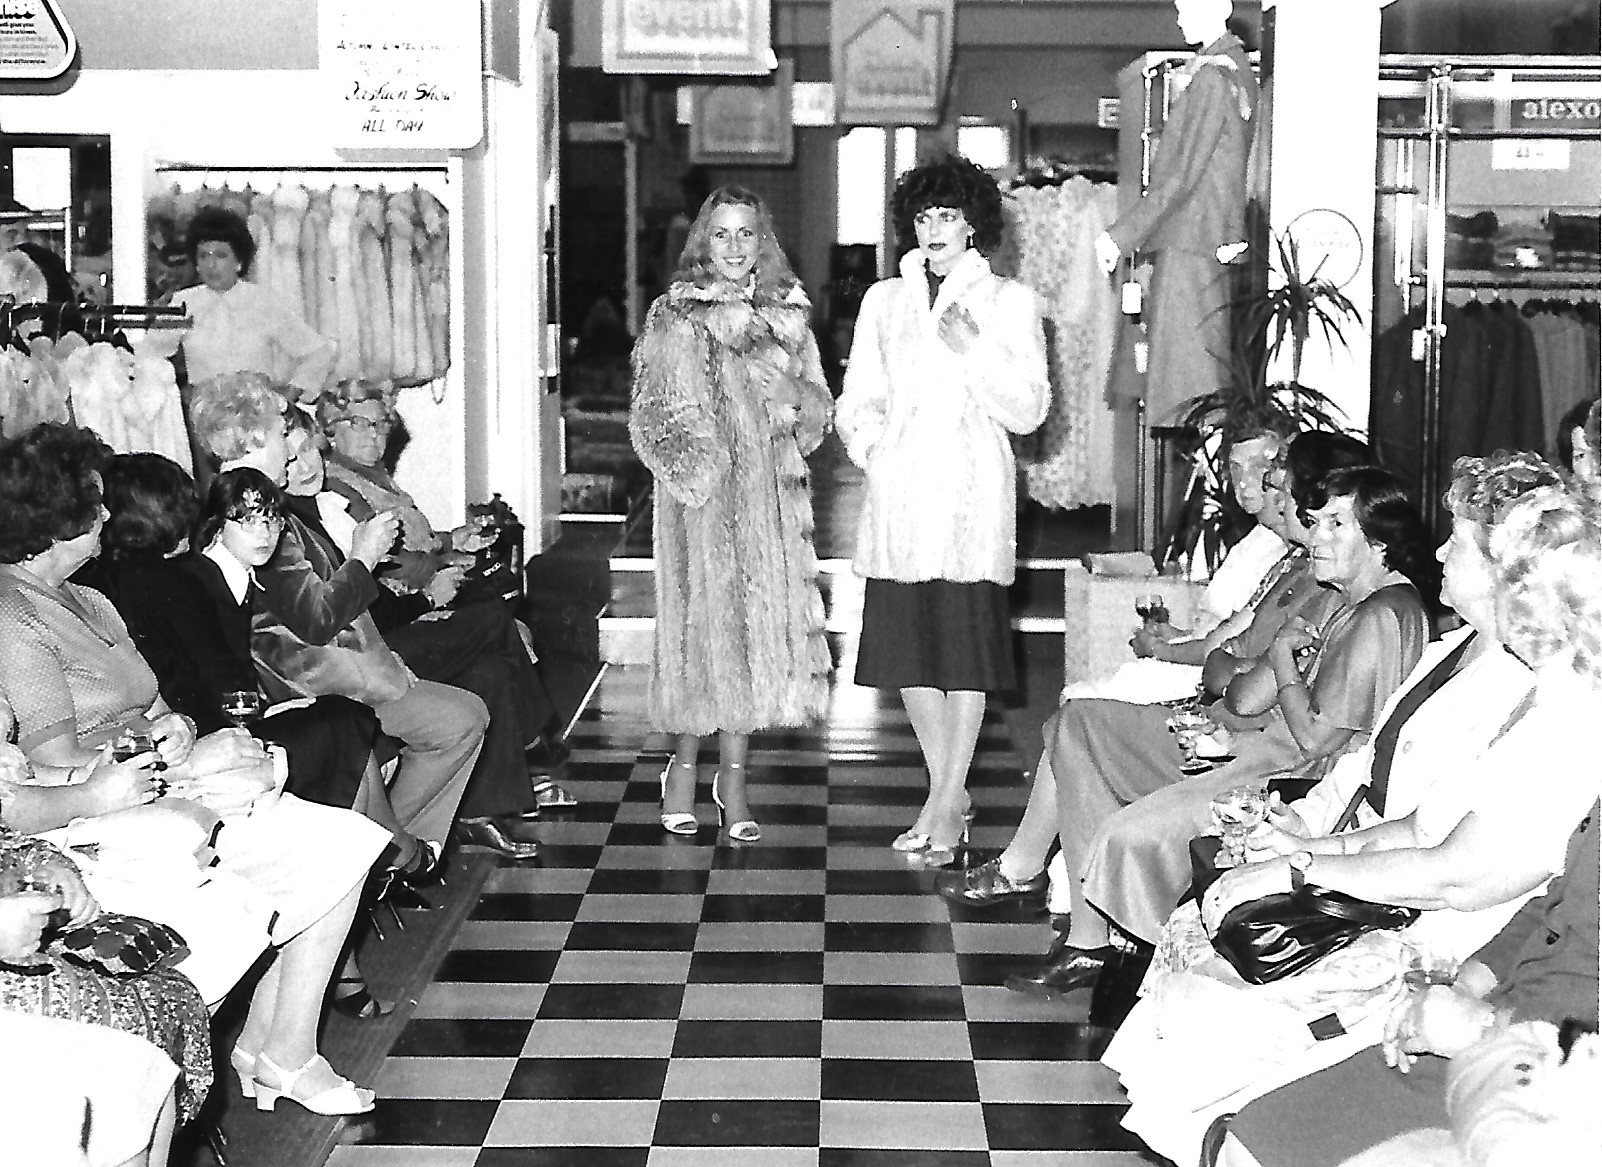 Fur coats were on display in this fashion show at a shop in Southport on 17th September 1981. Can you recognise which store this took place in?